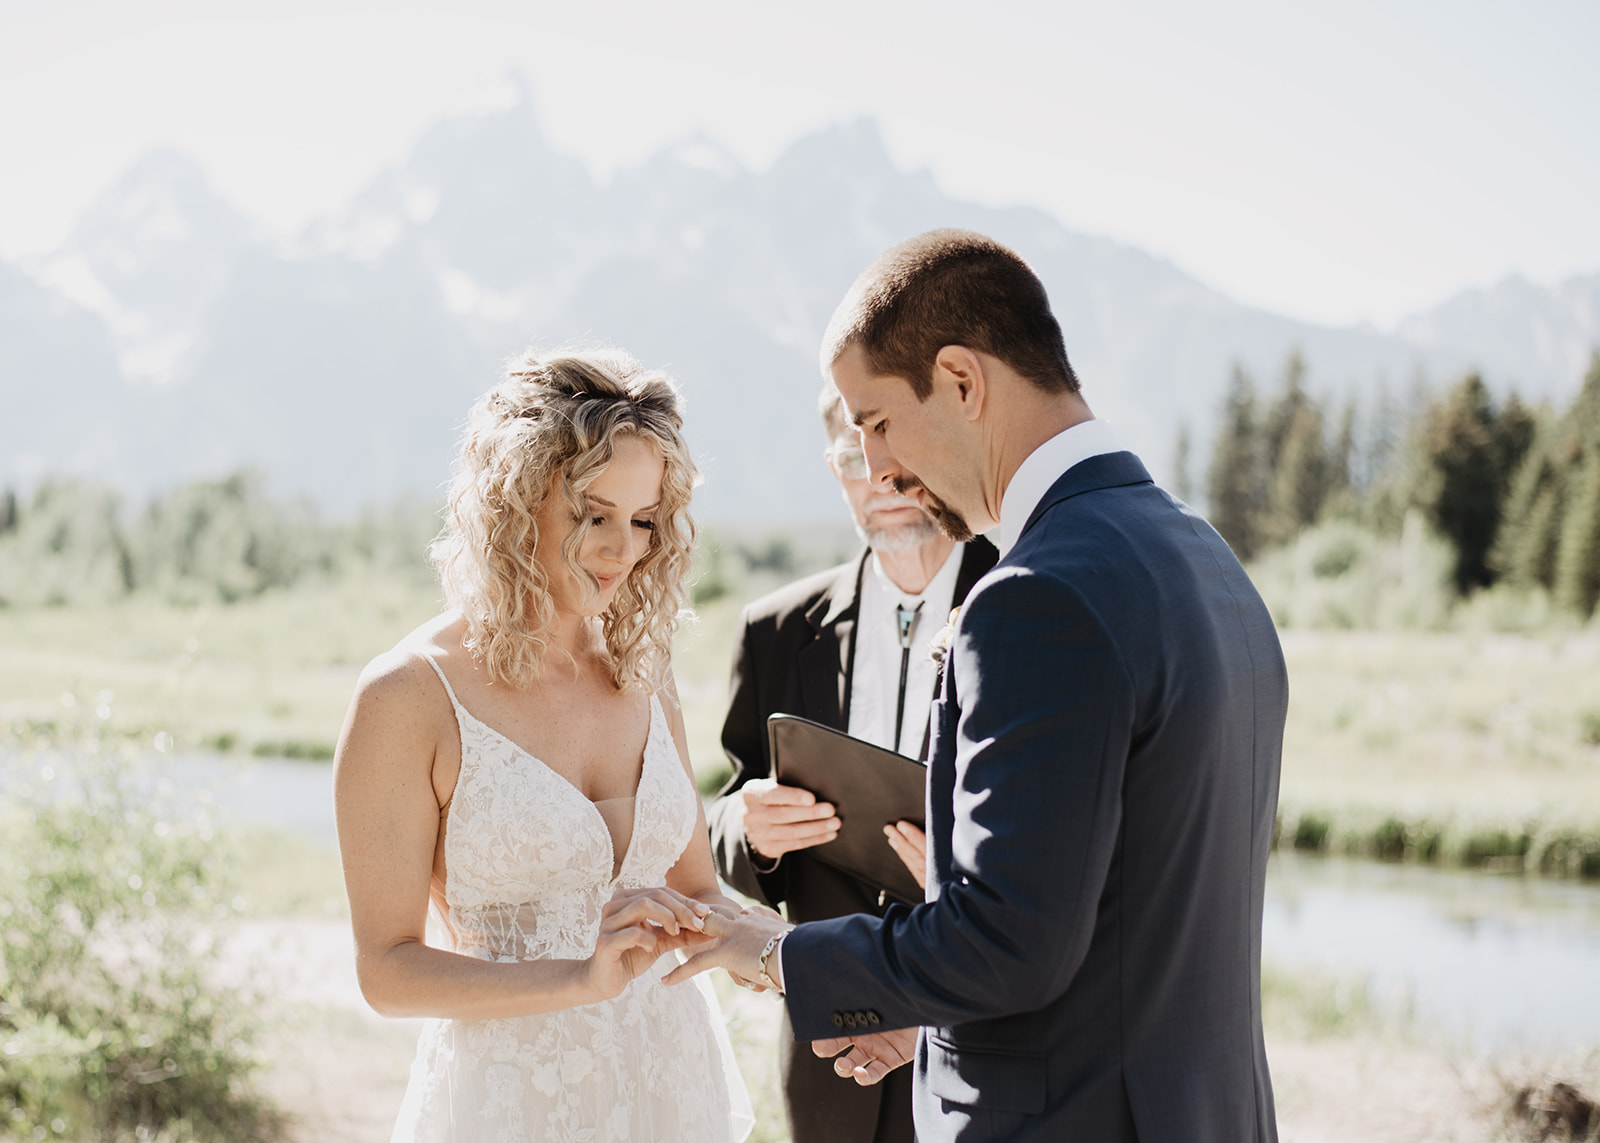 ring exchange during a wedding ceremony at Schwabacher Landing in the Grand Tetons